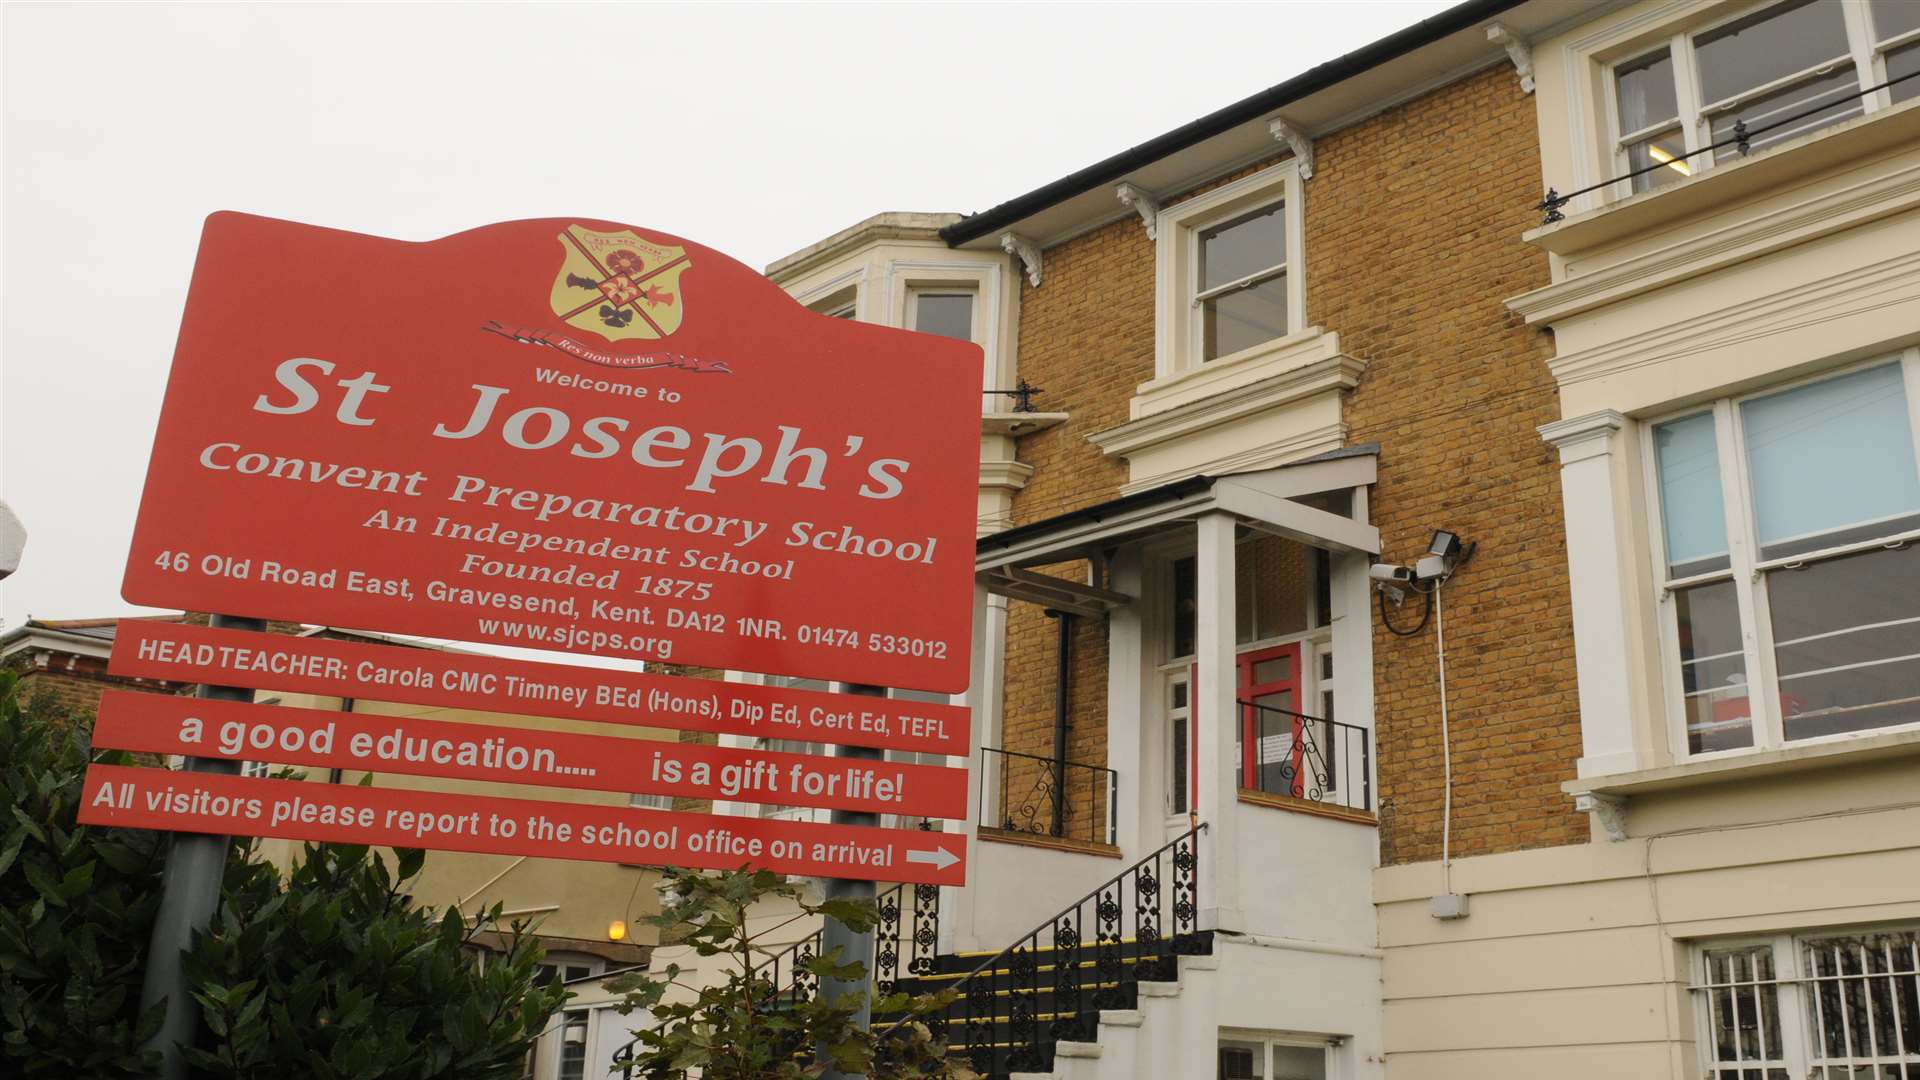 Parents at St Joseph's Prep School were concerned before the report